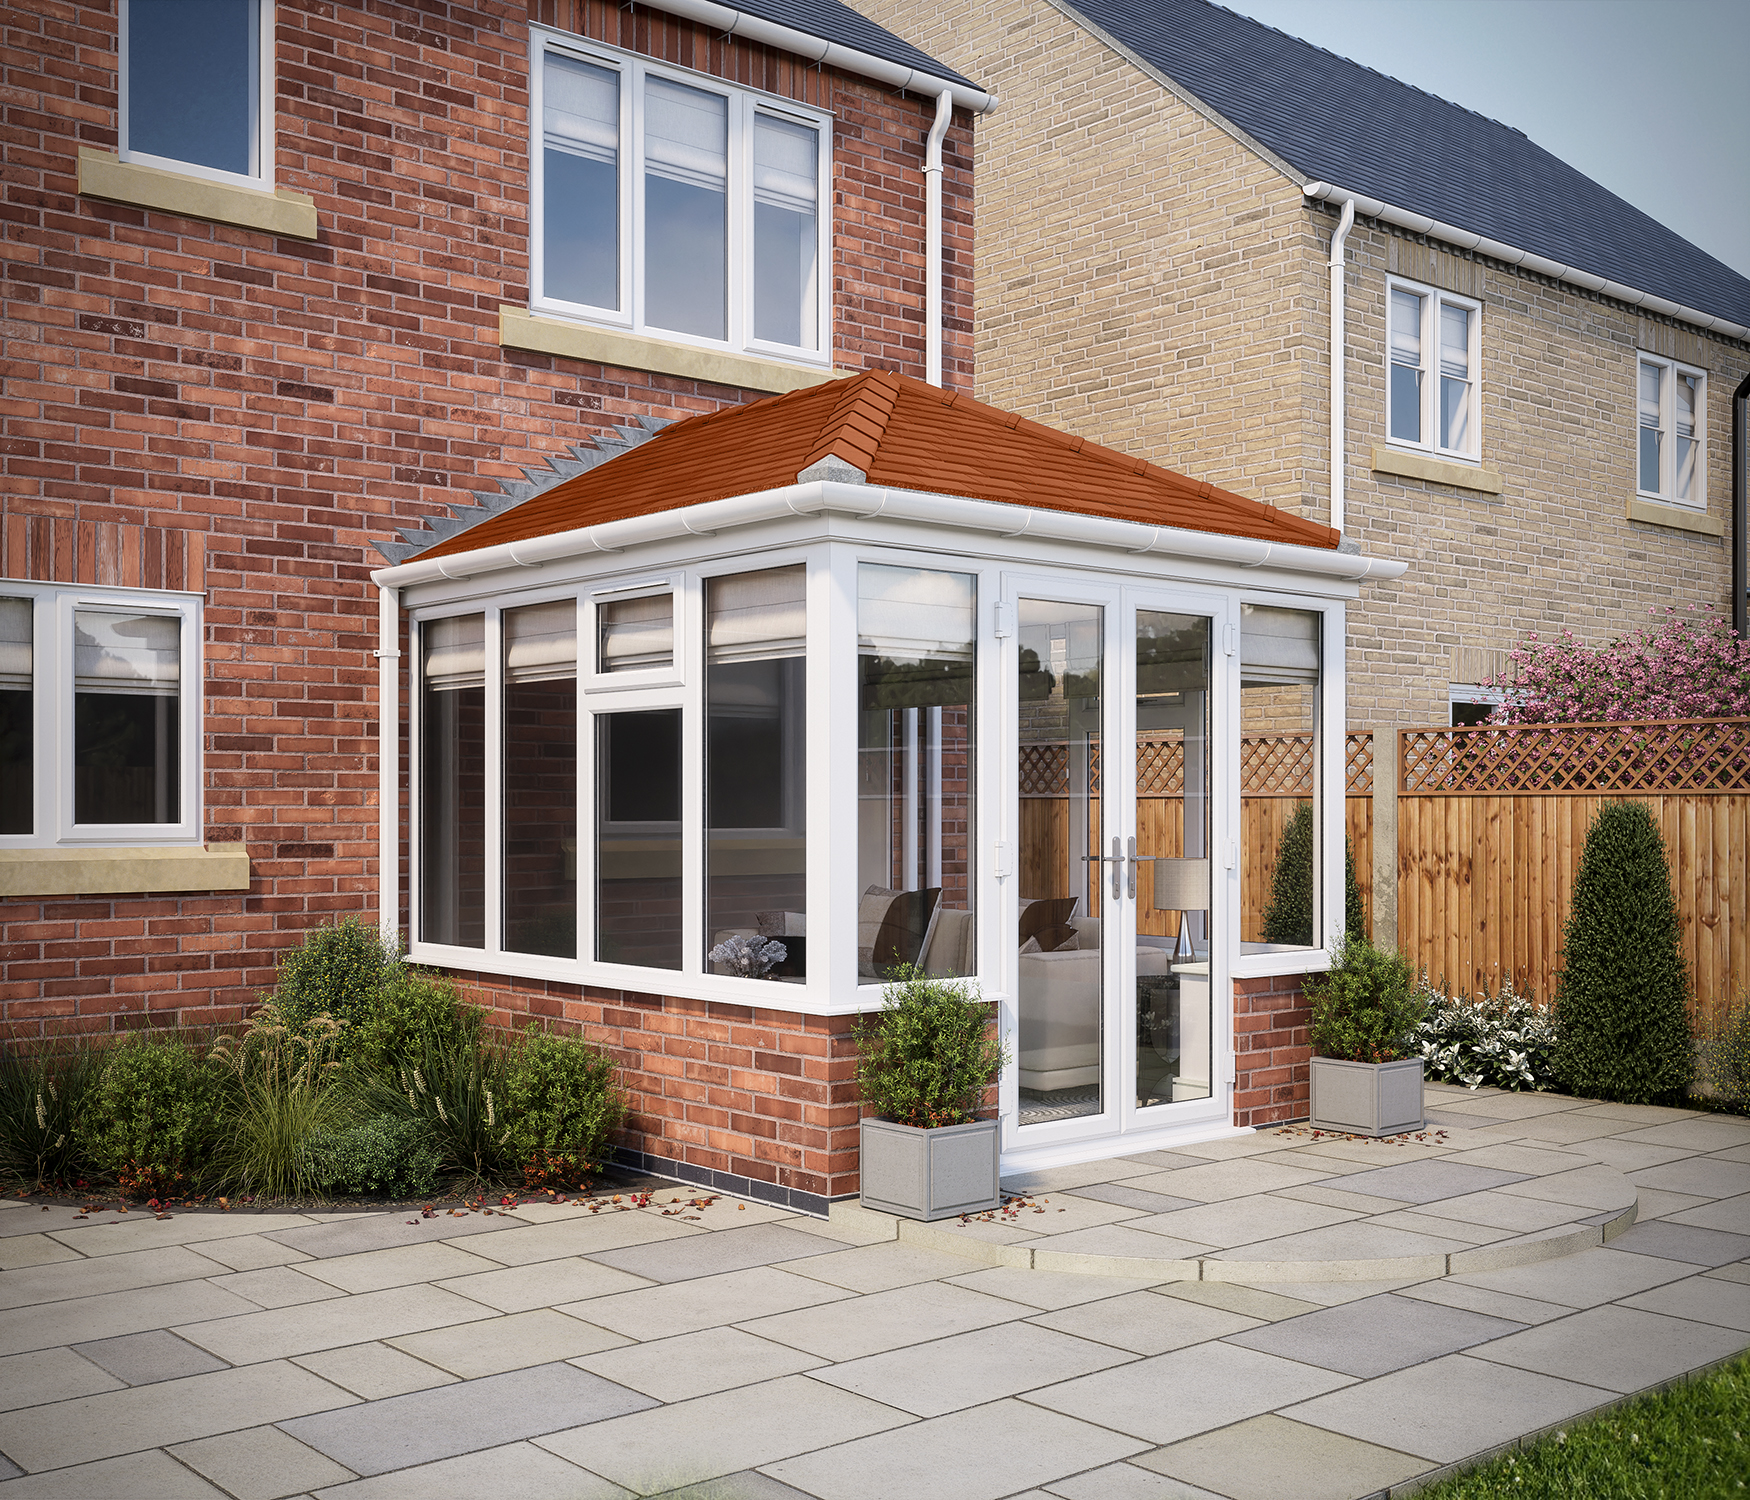 Image of SOLid Roof Edwardian Conservatory White Frames Dwarf Wall with Rustic Terracotta Tiles - 10 x 10ft